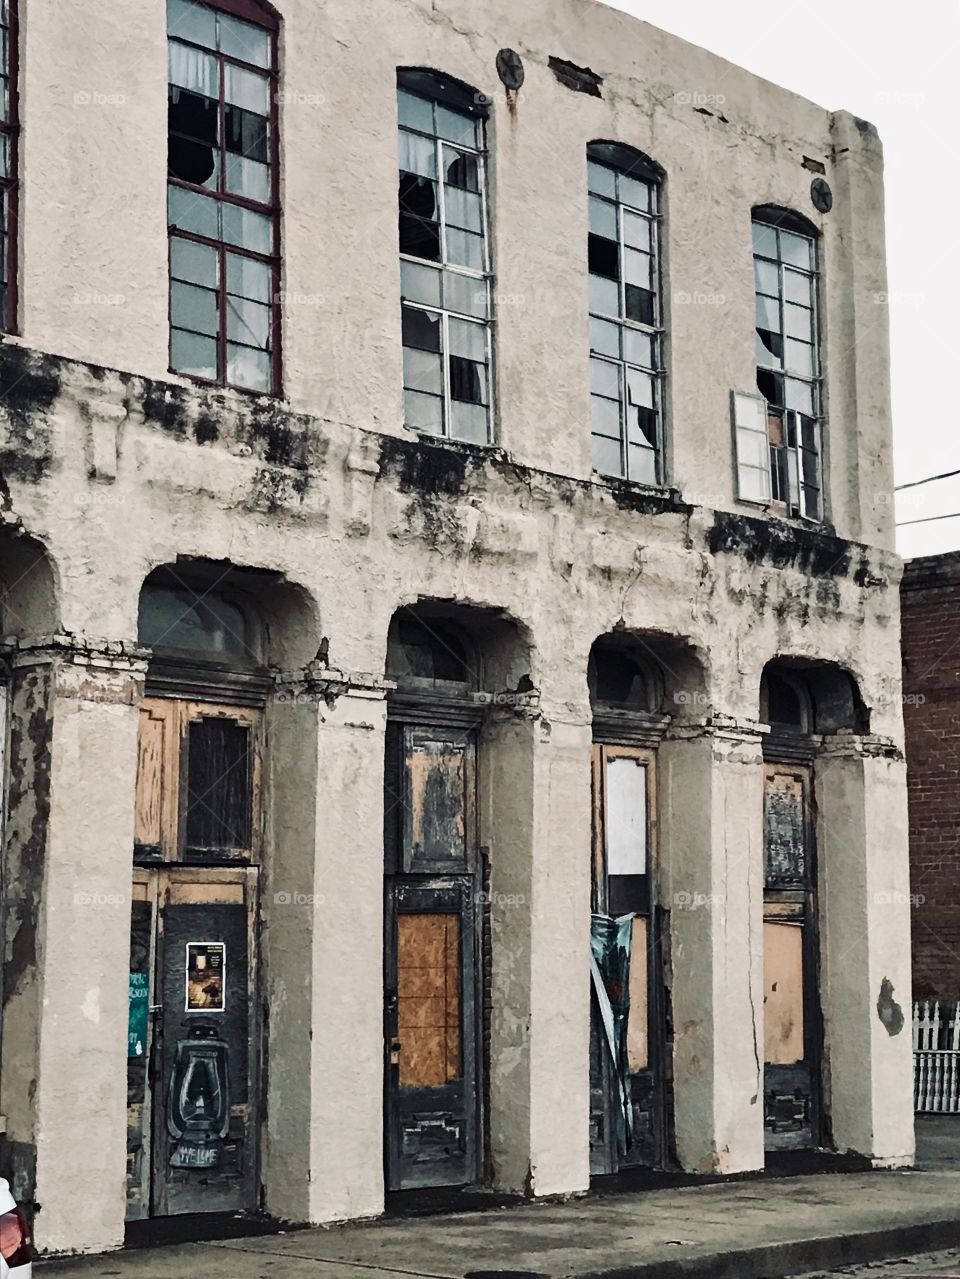 Downtown Jefferson Texas Old Abandoned Building